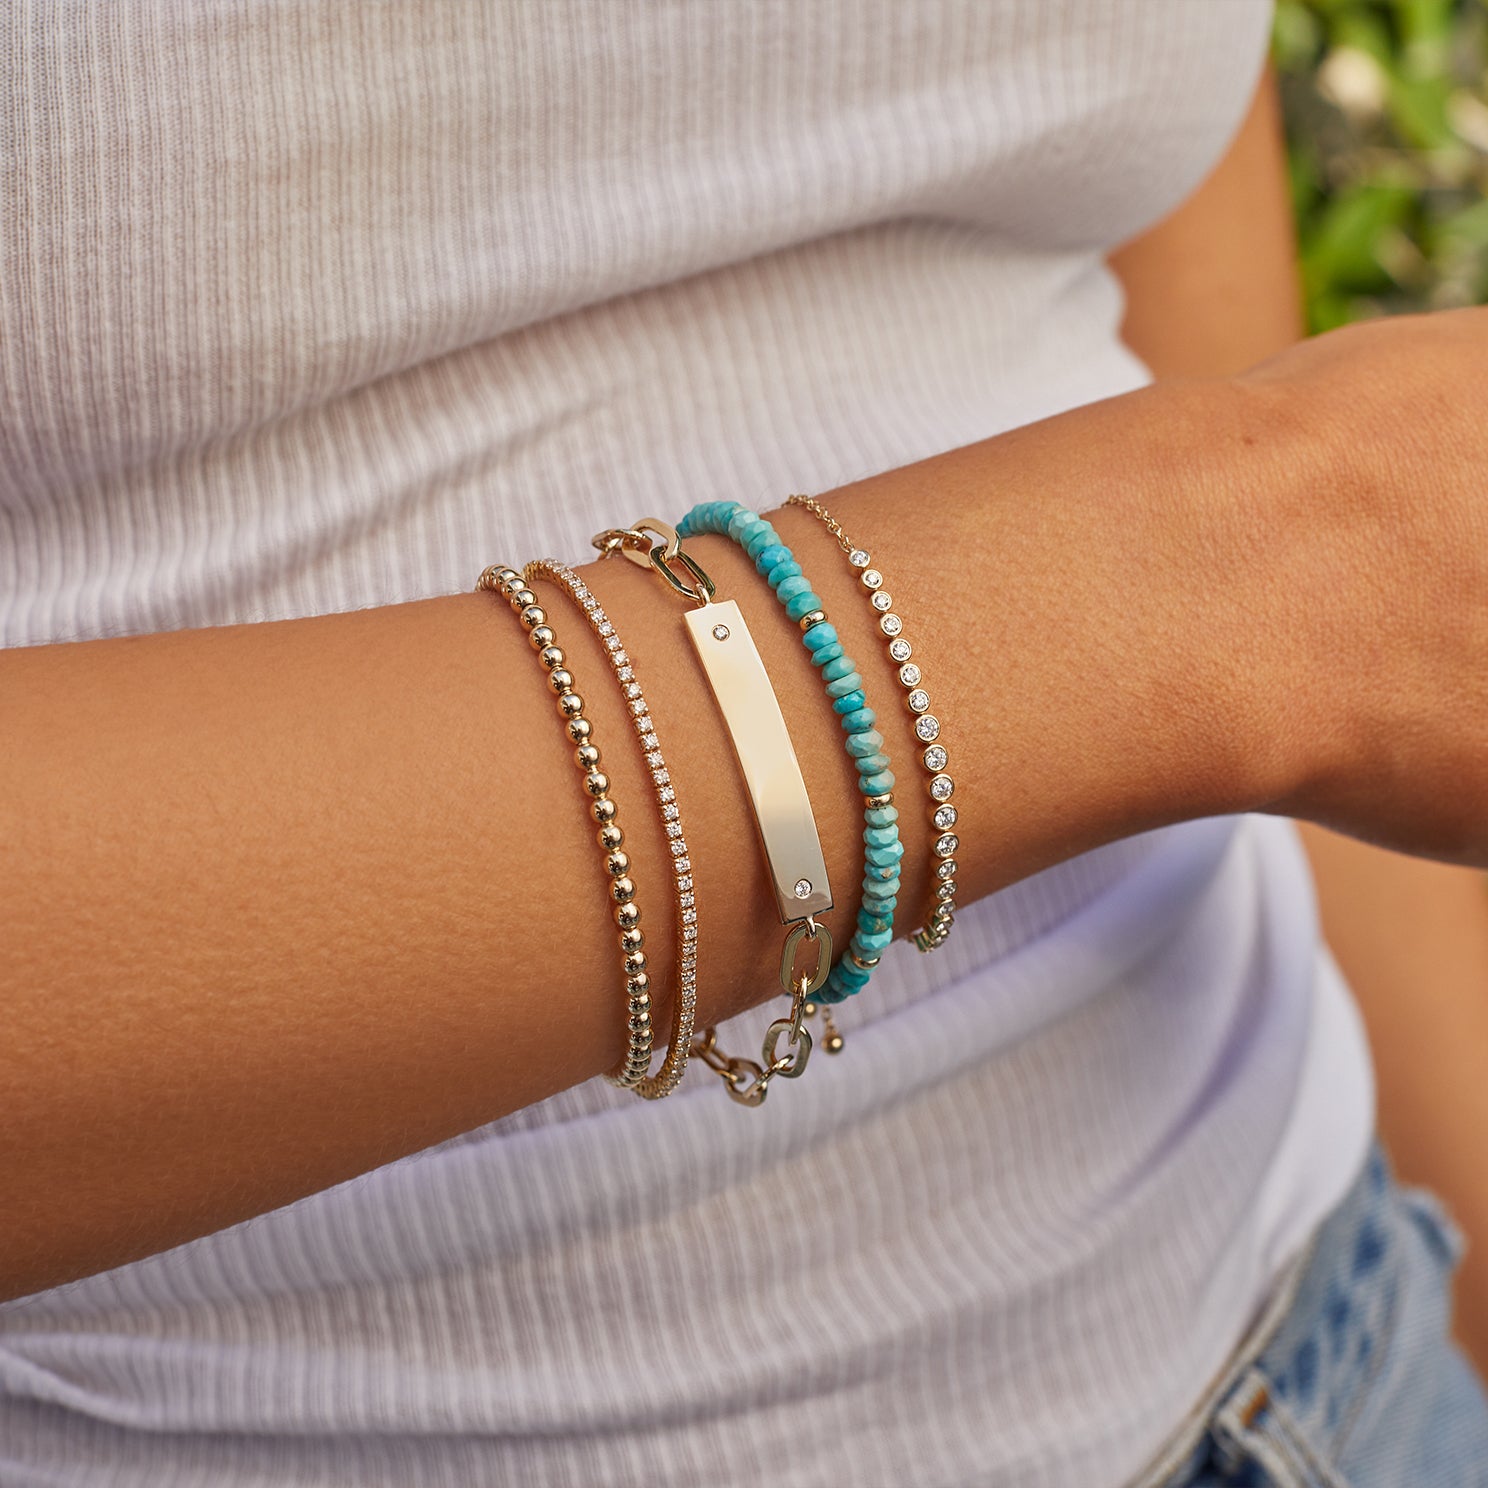 Nameplate Jumbo Link Bracelet in 14k yellow gold styled on wrist of model with turquoise beaded bracelet, two diamond bracelet,s and one gold ball bracelet with model wearing white tshirt